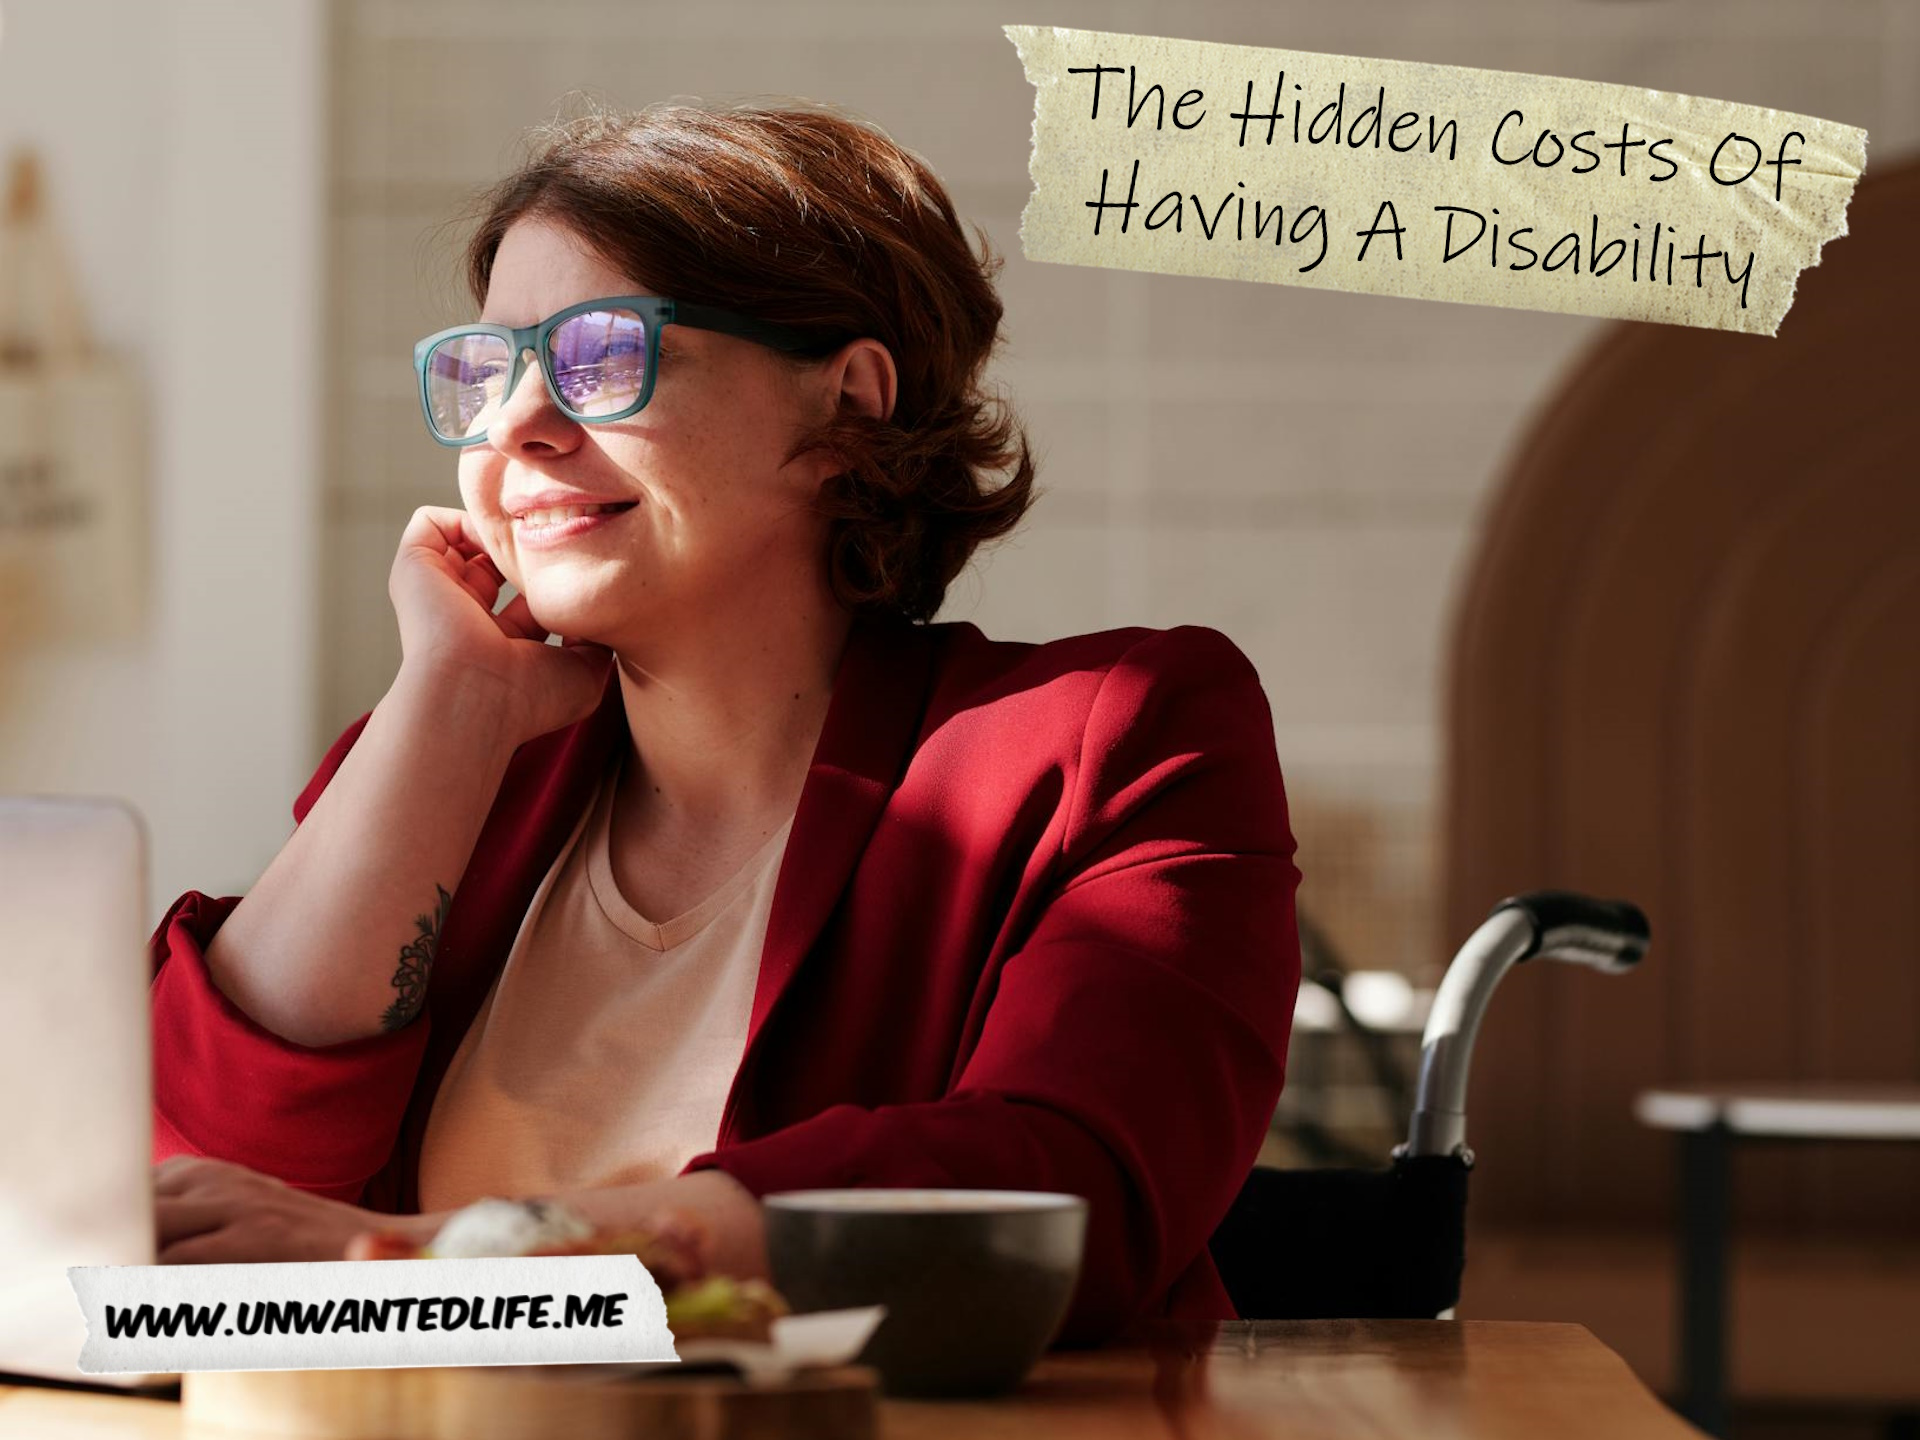 A photo of a White woman in a wheelchair, sitting at their desk thinking, to represent the topic of the article - The Hidden Costs Of Having A Disability